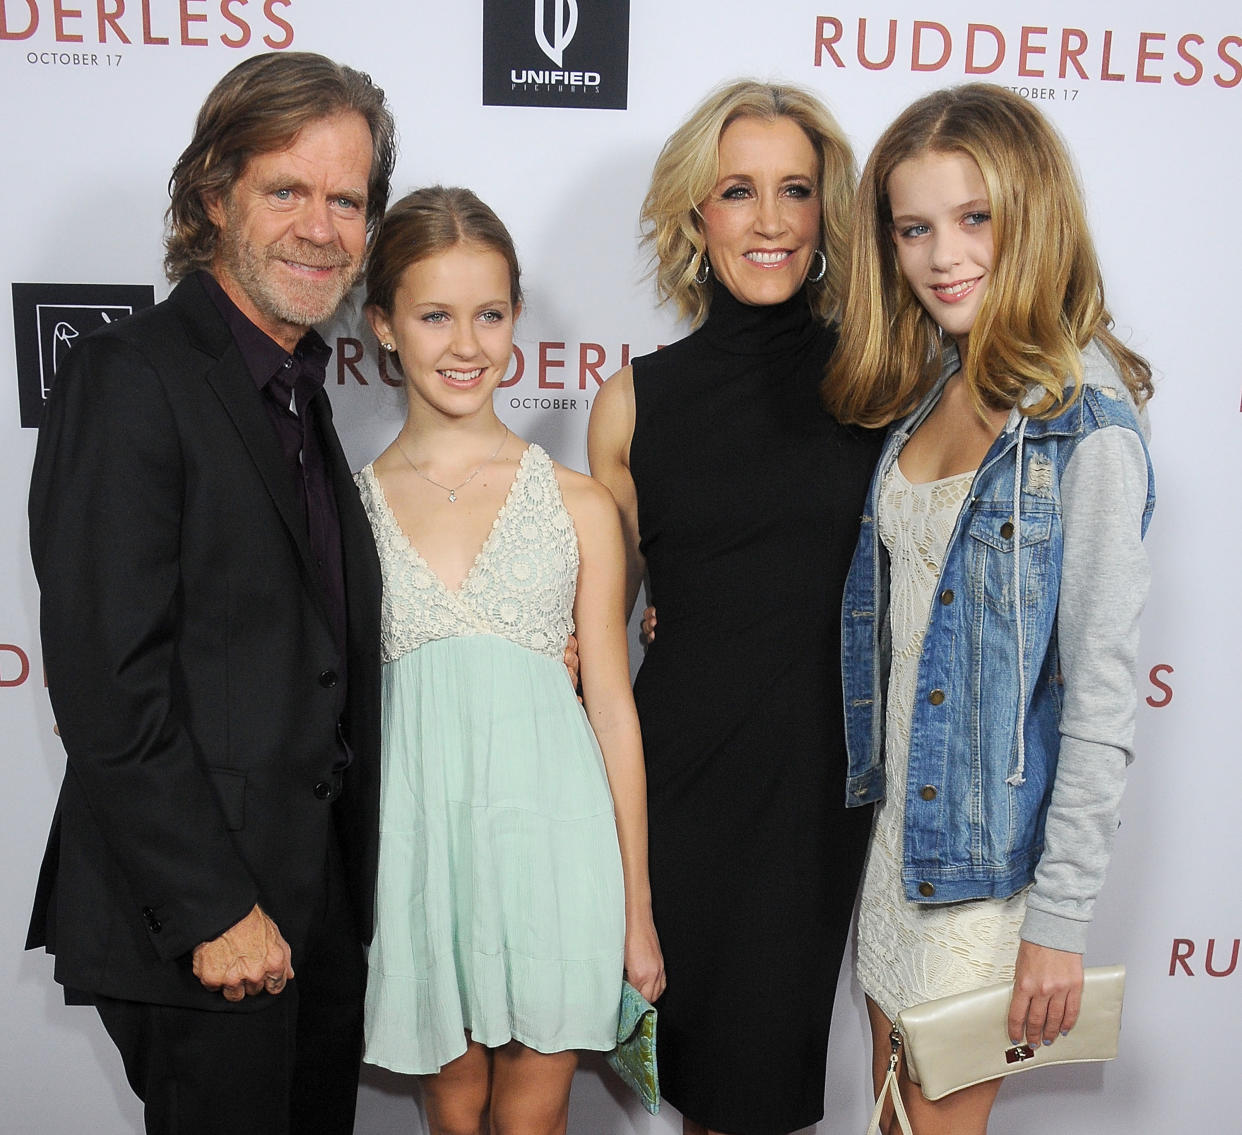 William H. Macy, Georgia Macy, Felicity Huffman and Sophia Macy arrive at the Los Angeles VIP Screening of Rudderless, directed by William H. Macy.